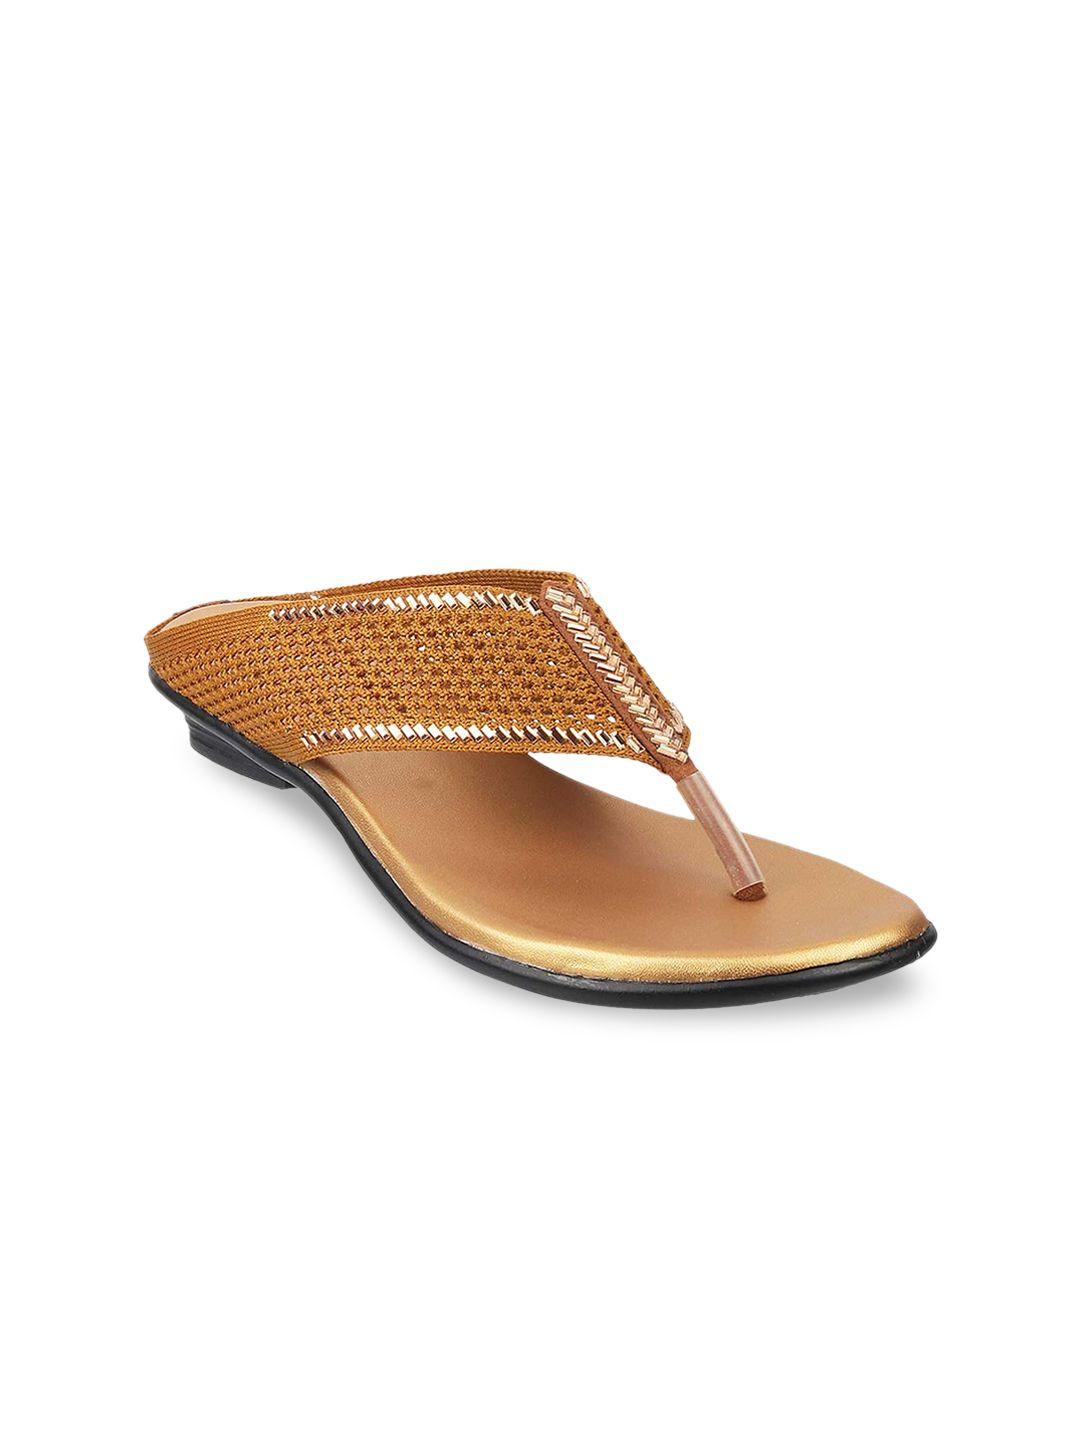 walkway by metro women gold-toned open toe flats with laser cuts